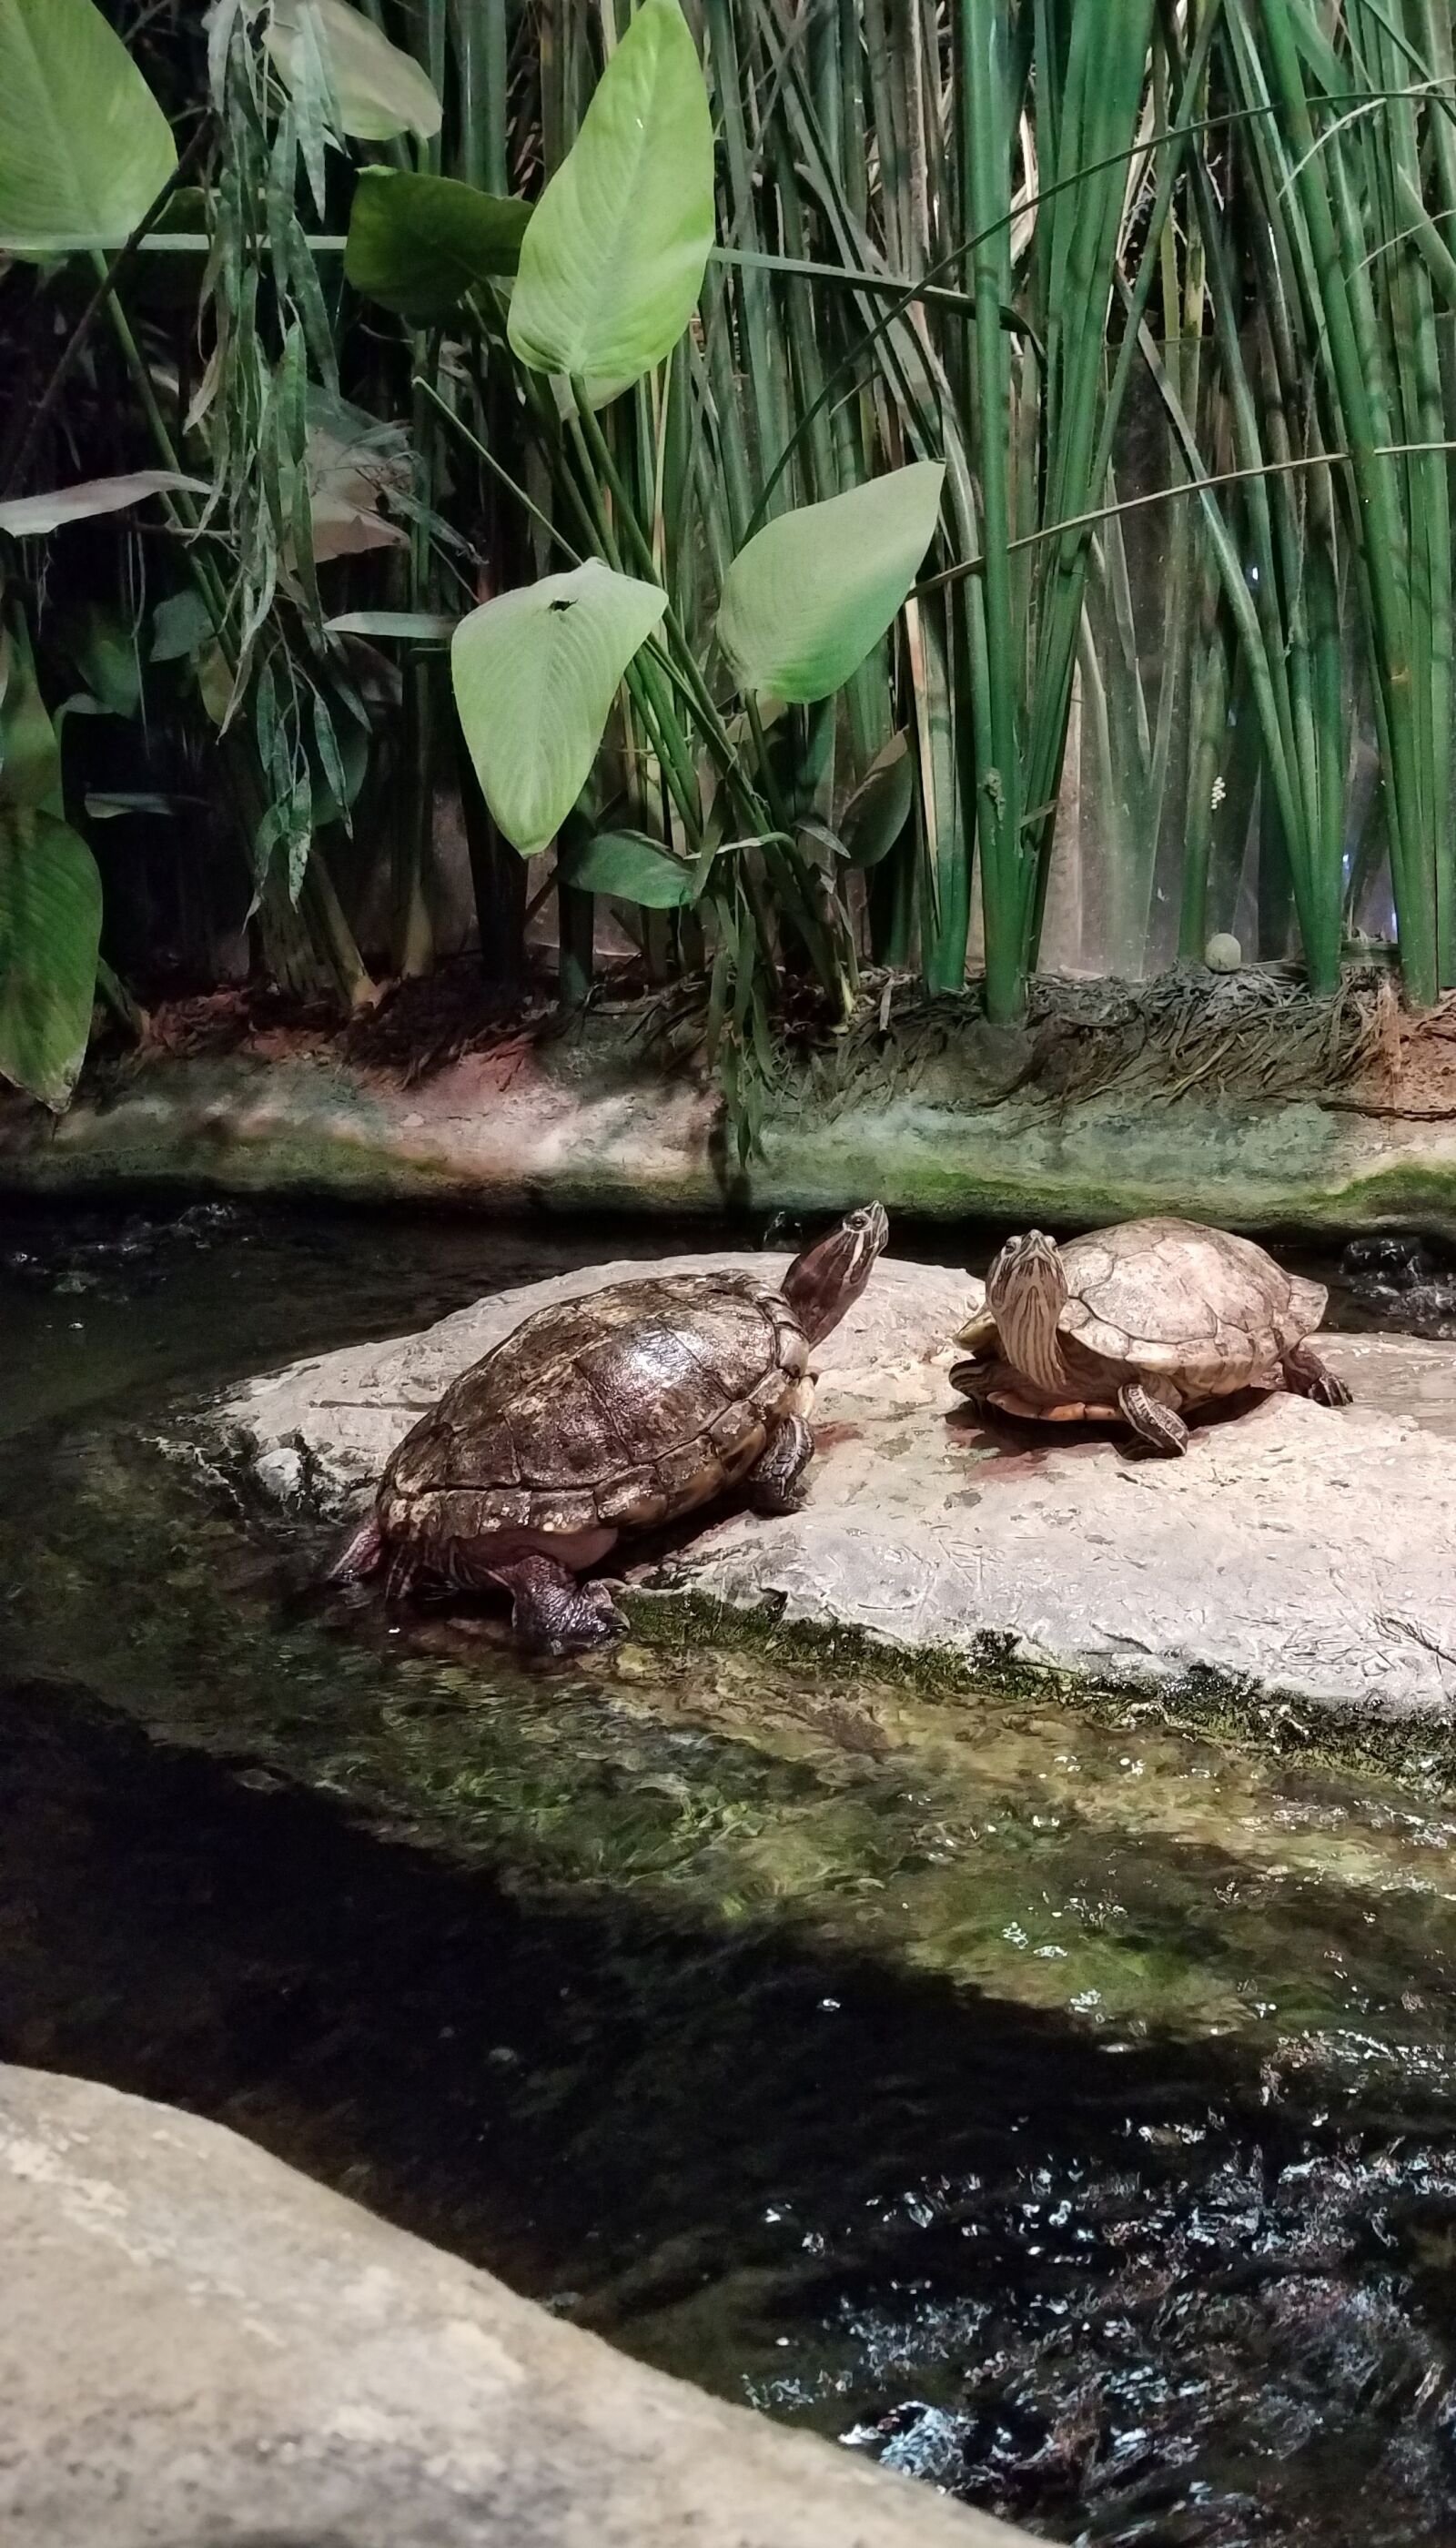 Samsung Galaxy S7 sample photo. Turtles, turtle, river photography